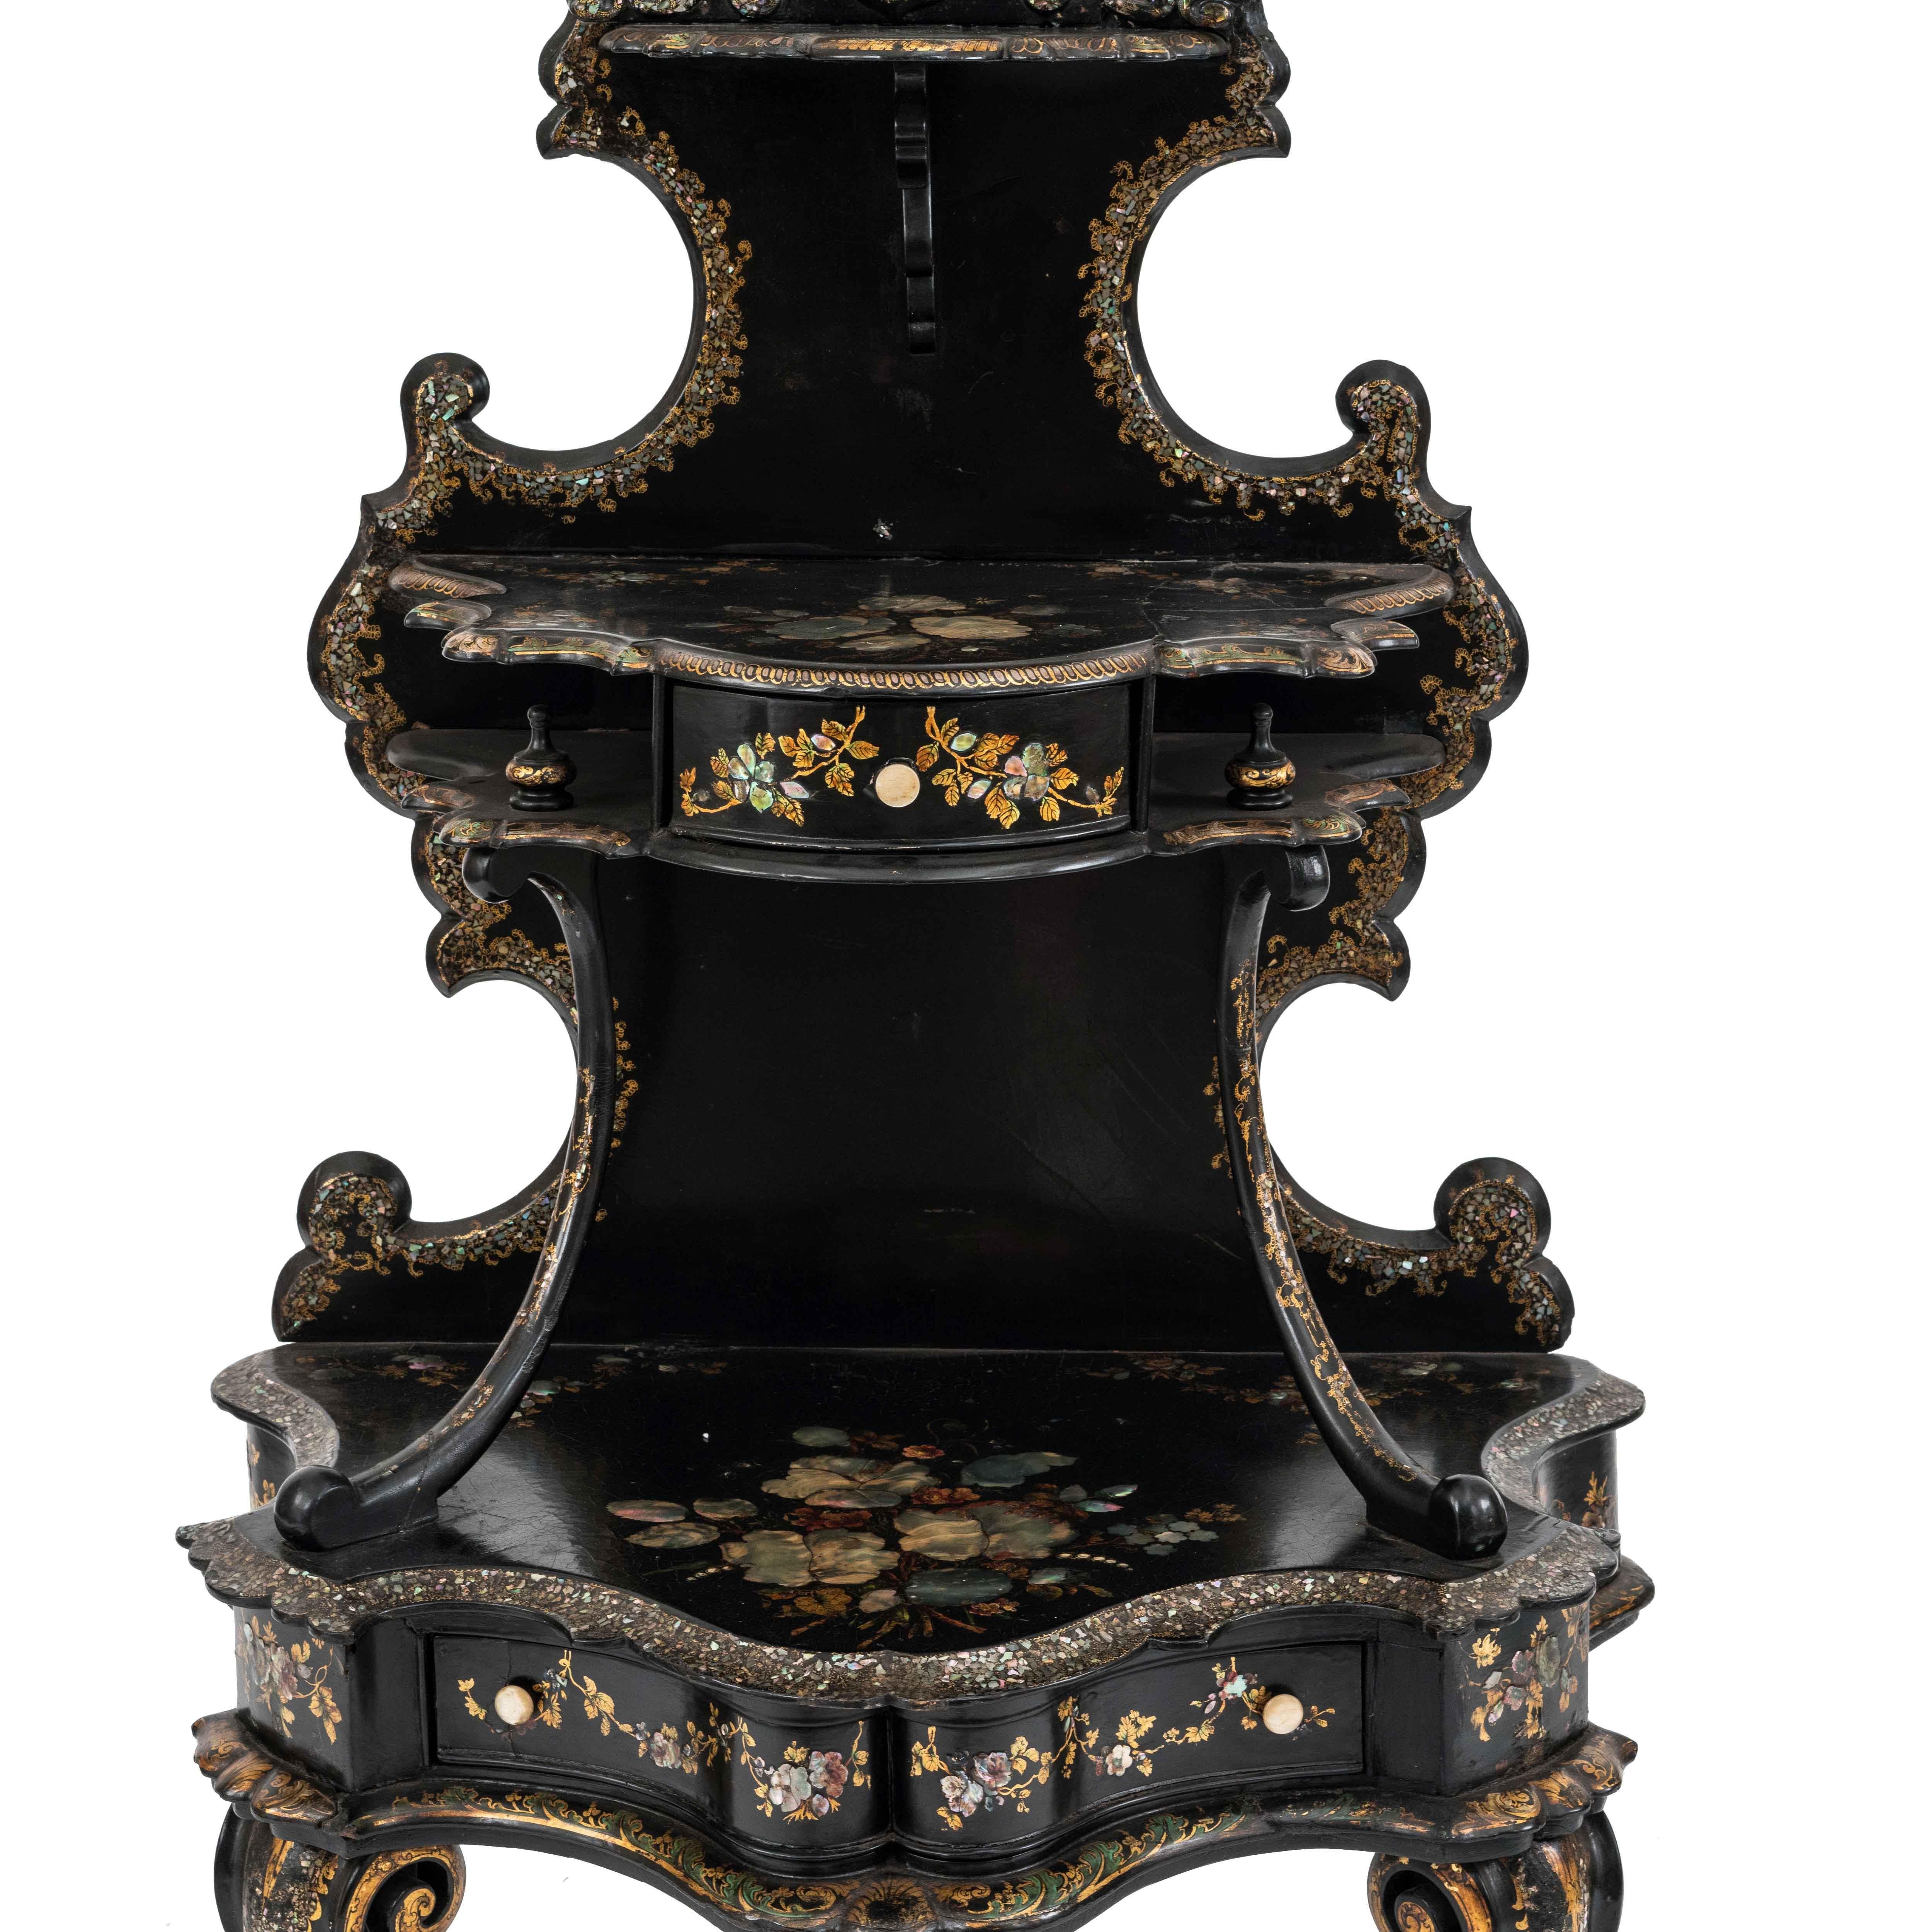 English Victorian papier mache pearl inlaid black lacquered 3 tier etagere with oval mirror and 2 drawers.
     